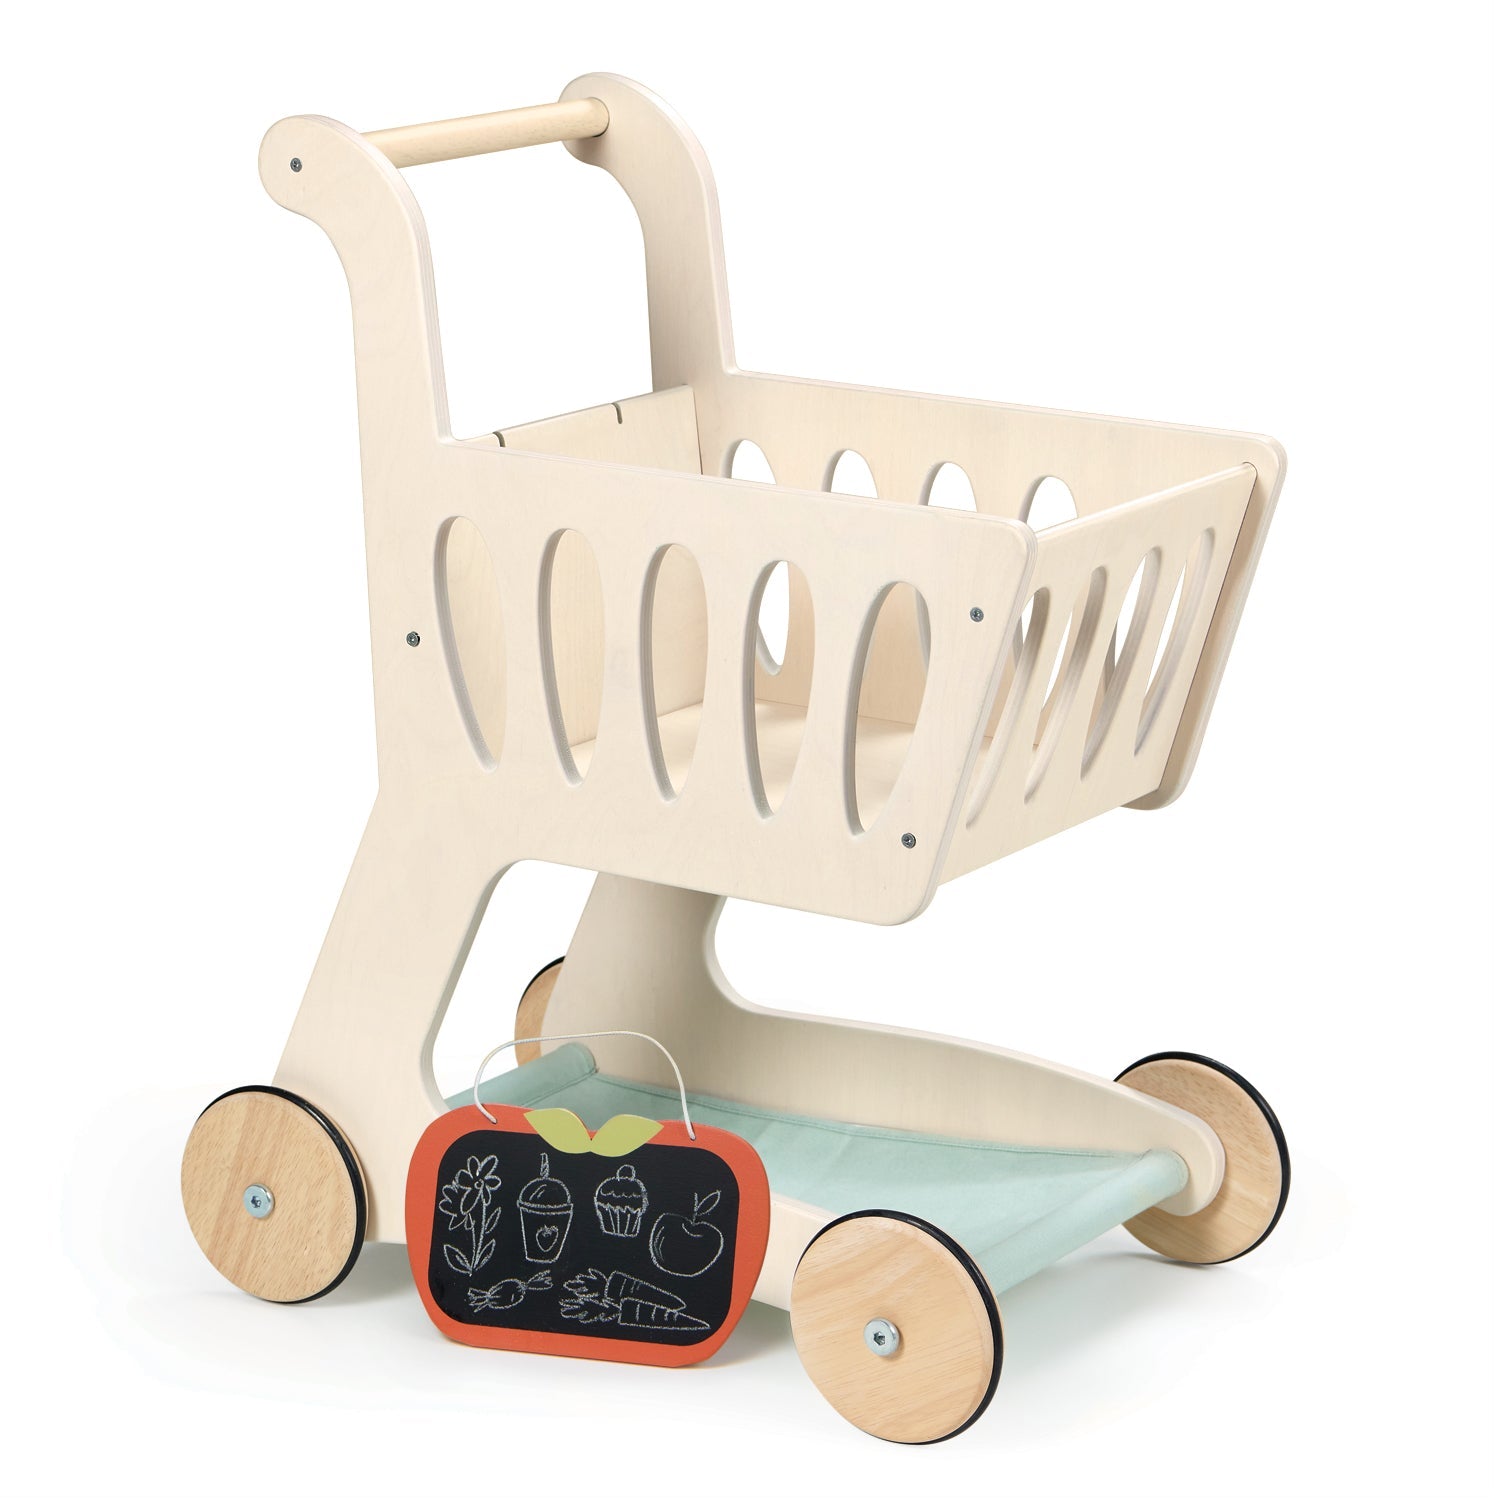 Tender Leaf Toys Shopping Cart - A stylish wooden shopping cart with a fabric base and an apple-shaped chalkboard, perfect for shopping adventures and creative lists or drawings.